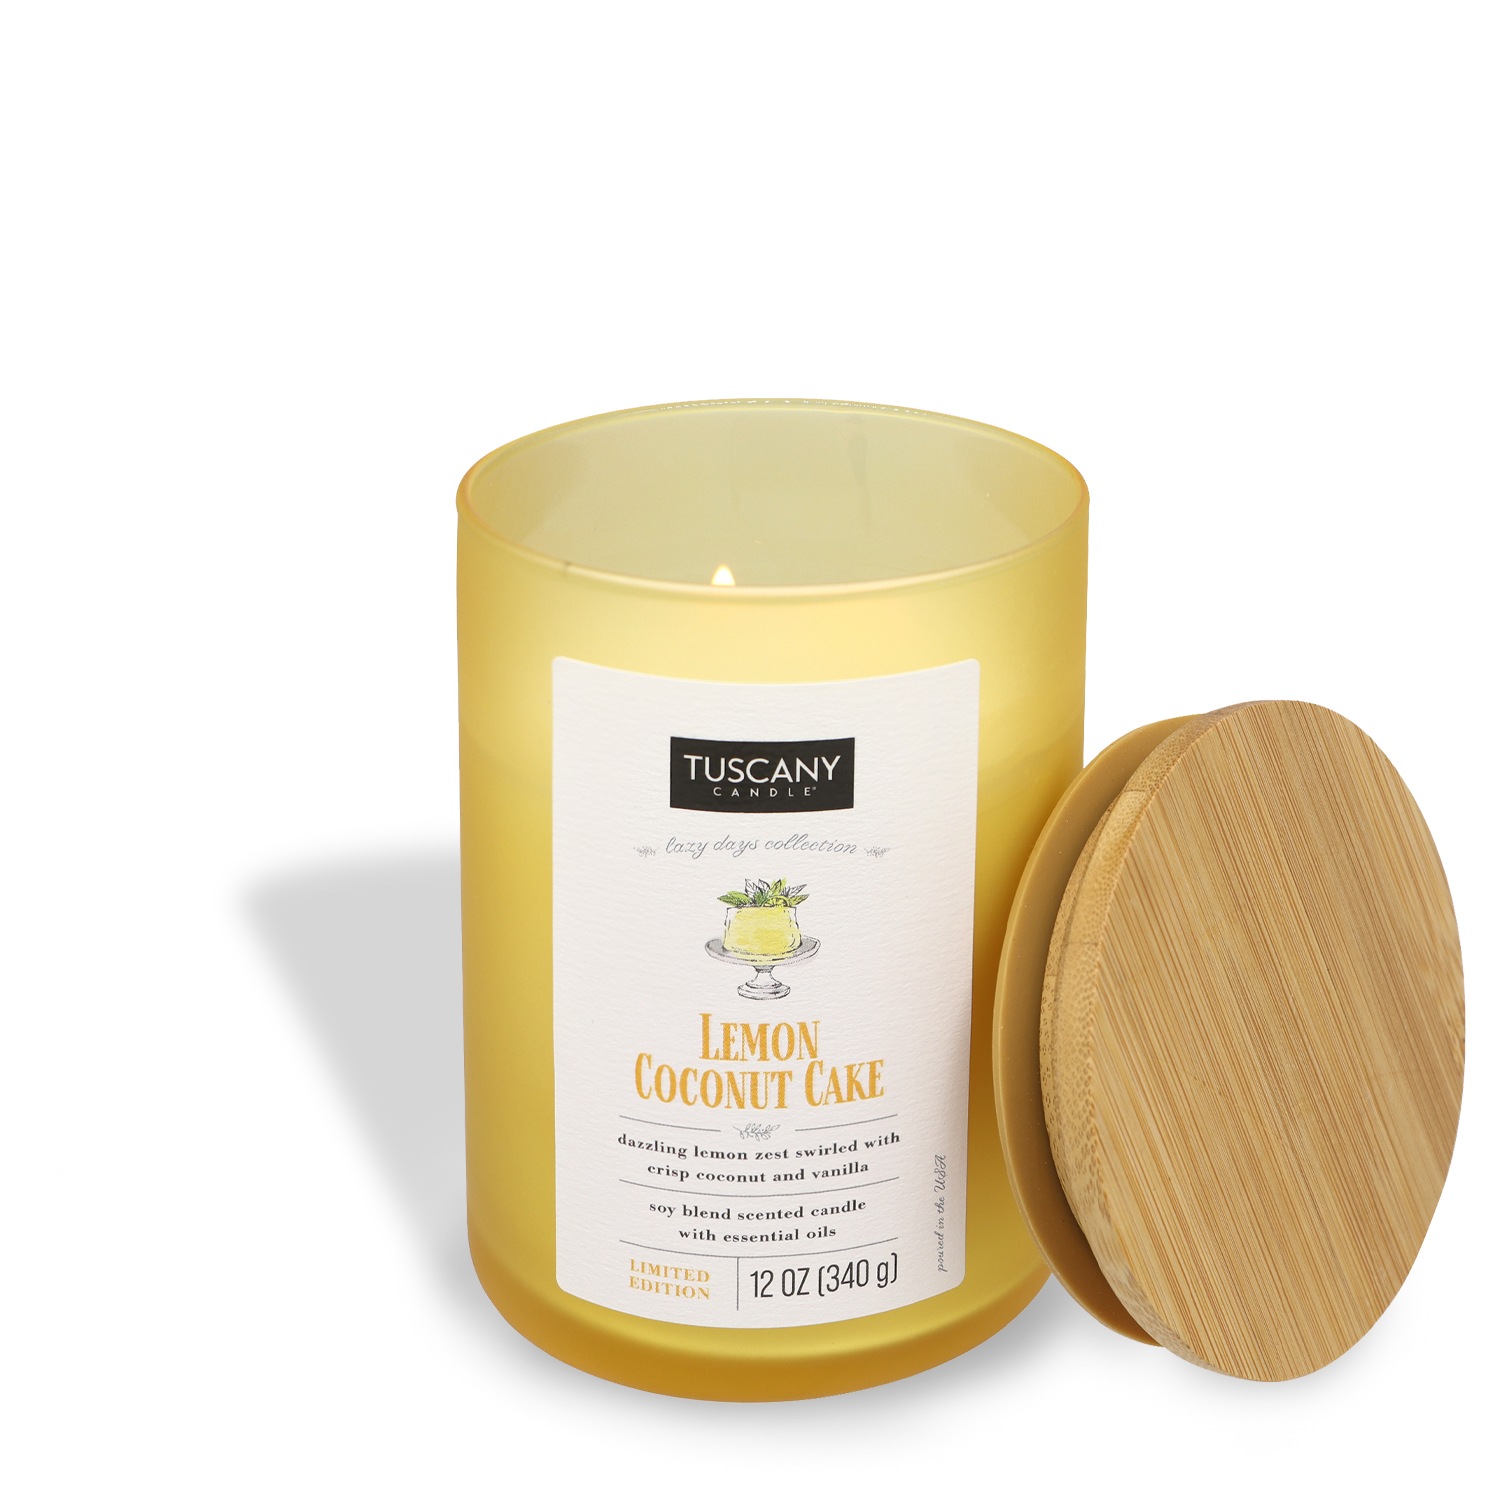 A Lemon Coconut Cake (12 oz) scented candle with a wooden lid from the Tuscany Candle® SEASONAL.